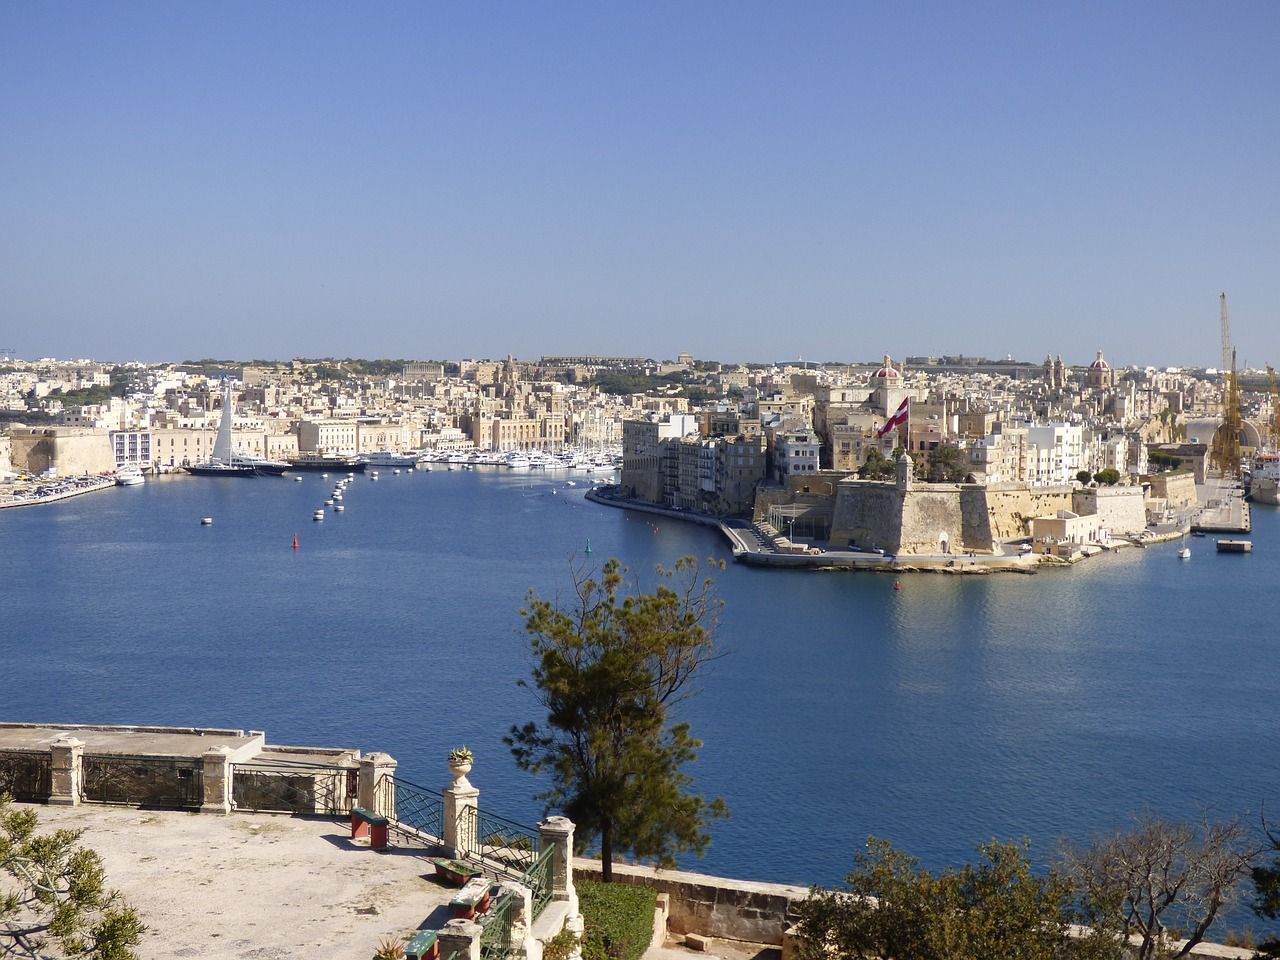 Malta to start lifting COVID-19 measures